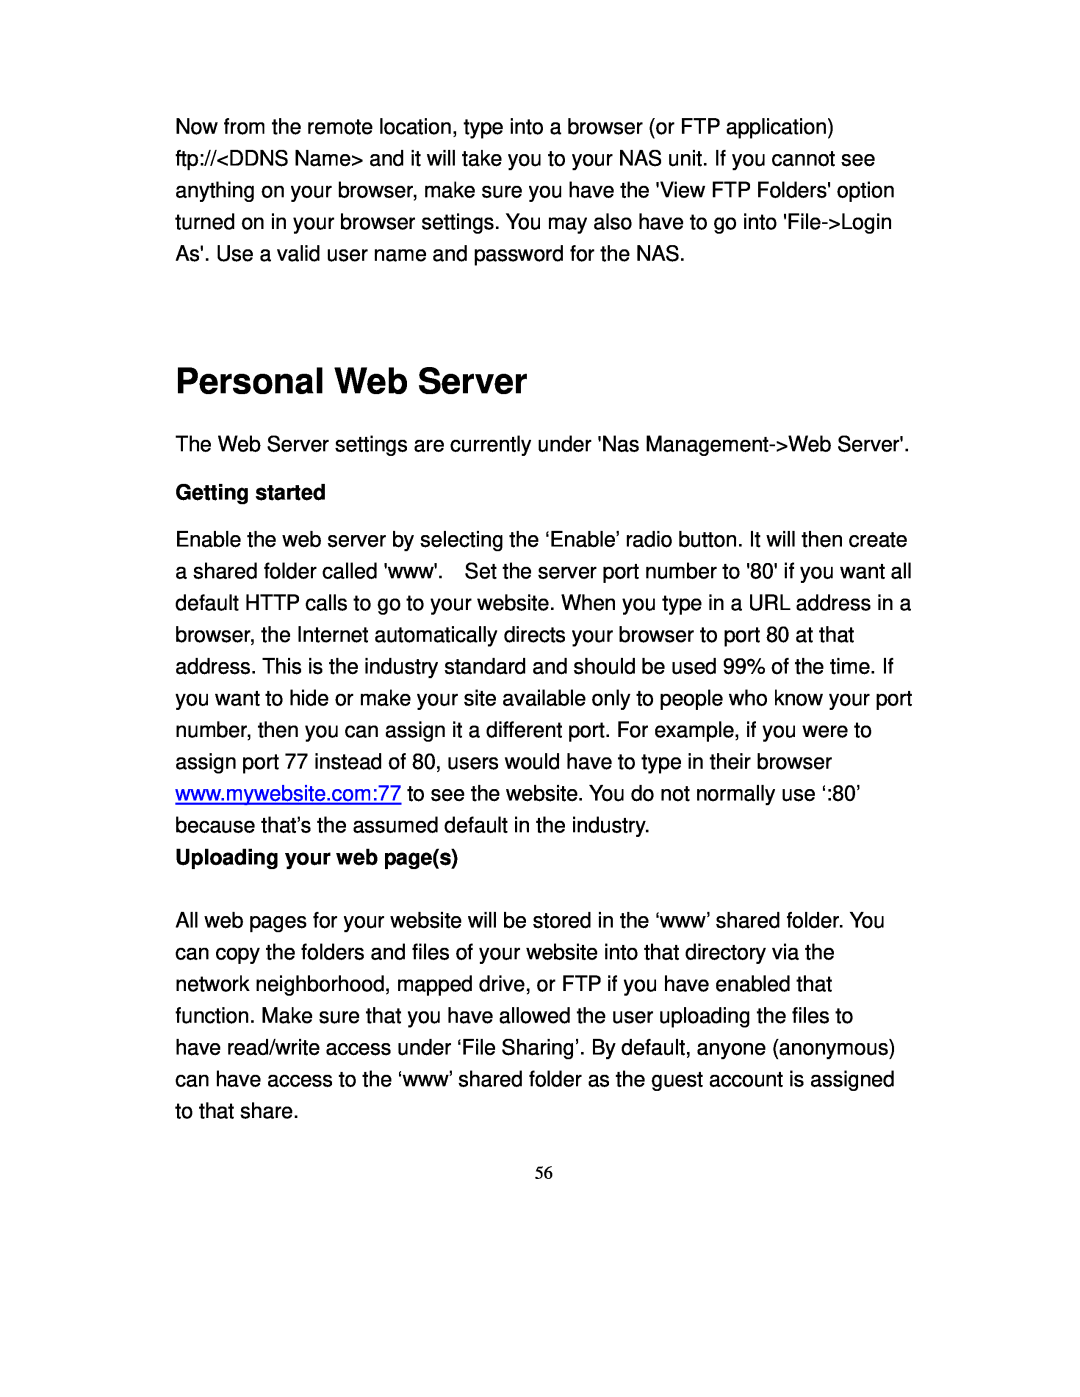 Intellinet Network Solutions 501705 manual Personal Web Server, Getting started, Uploading your web pages 